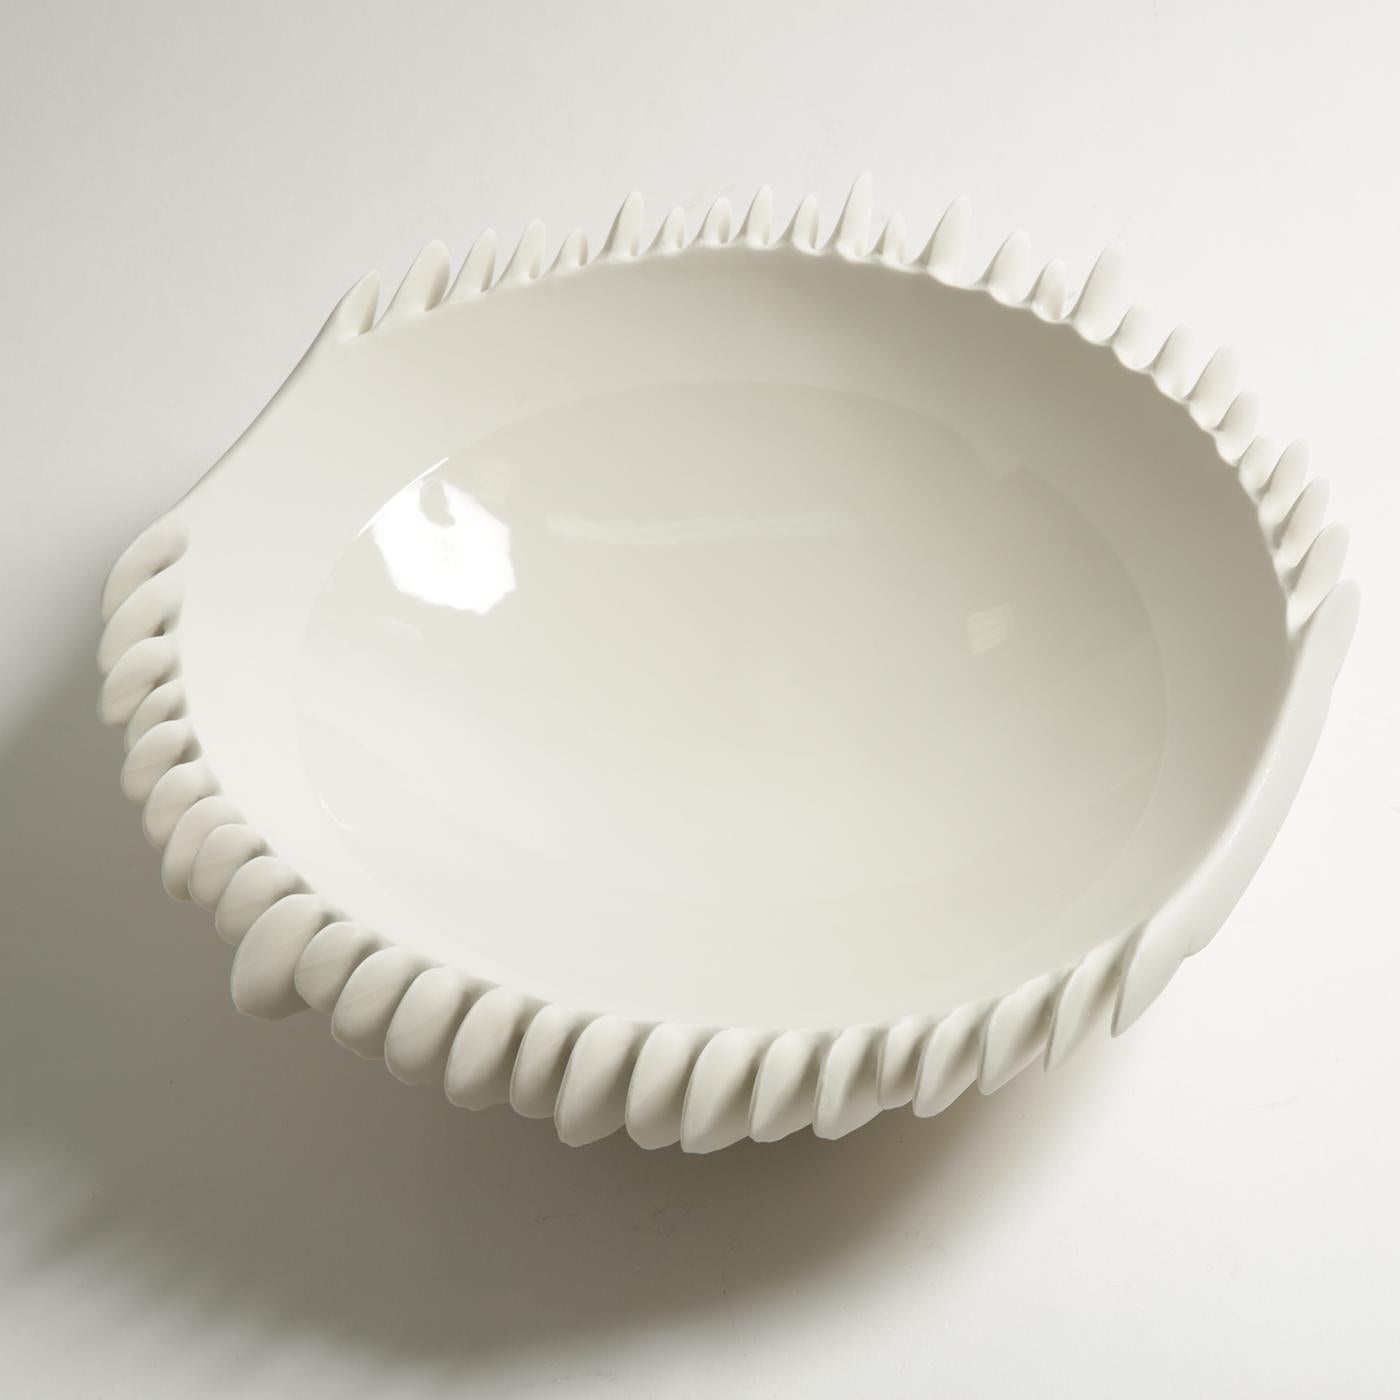 The smooth surface of a snow-white porcelain shell is riddled on the outside with fine crevices. A meticulously crafted mold and the use of unglazed porcelain, or 